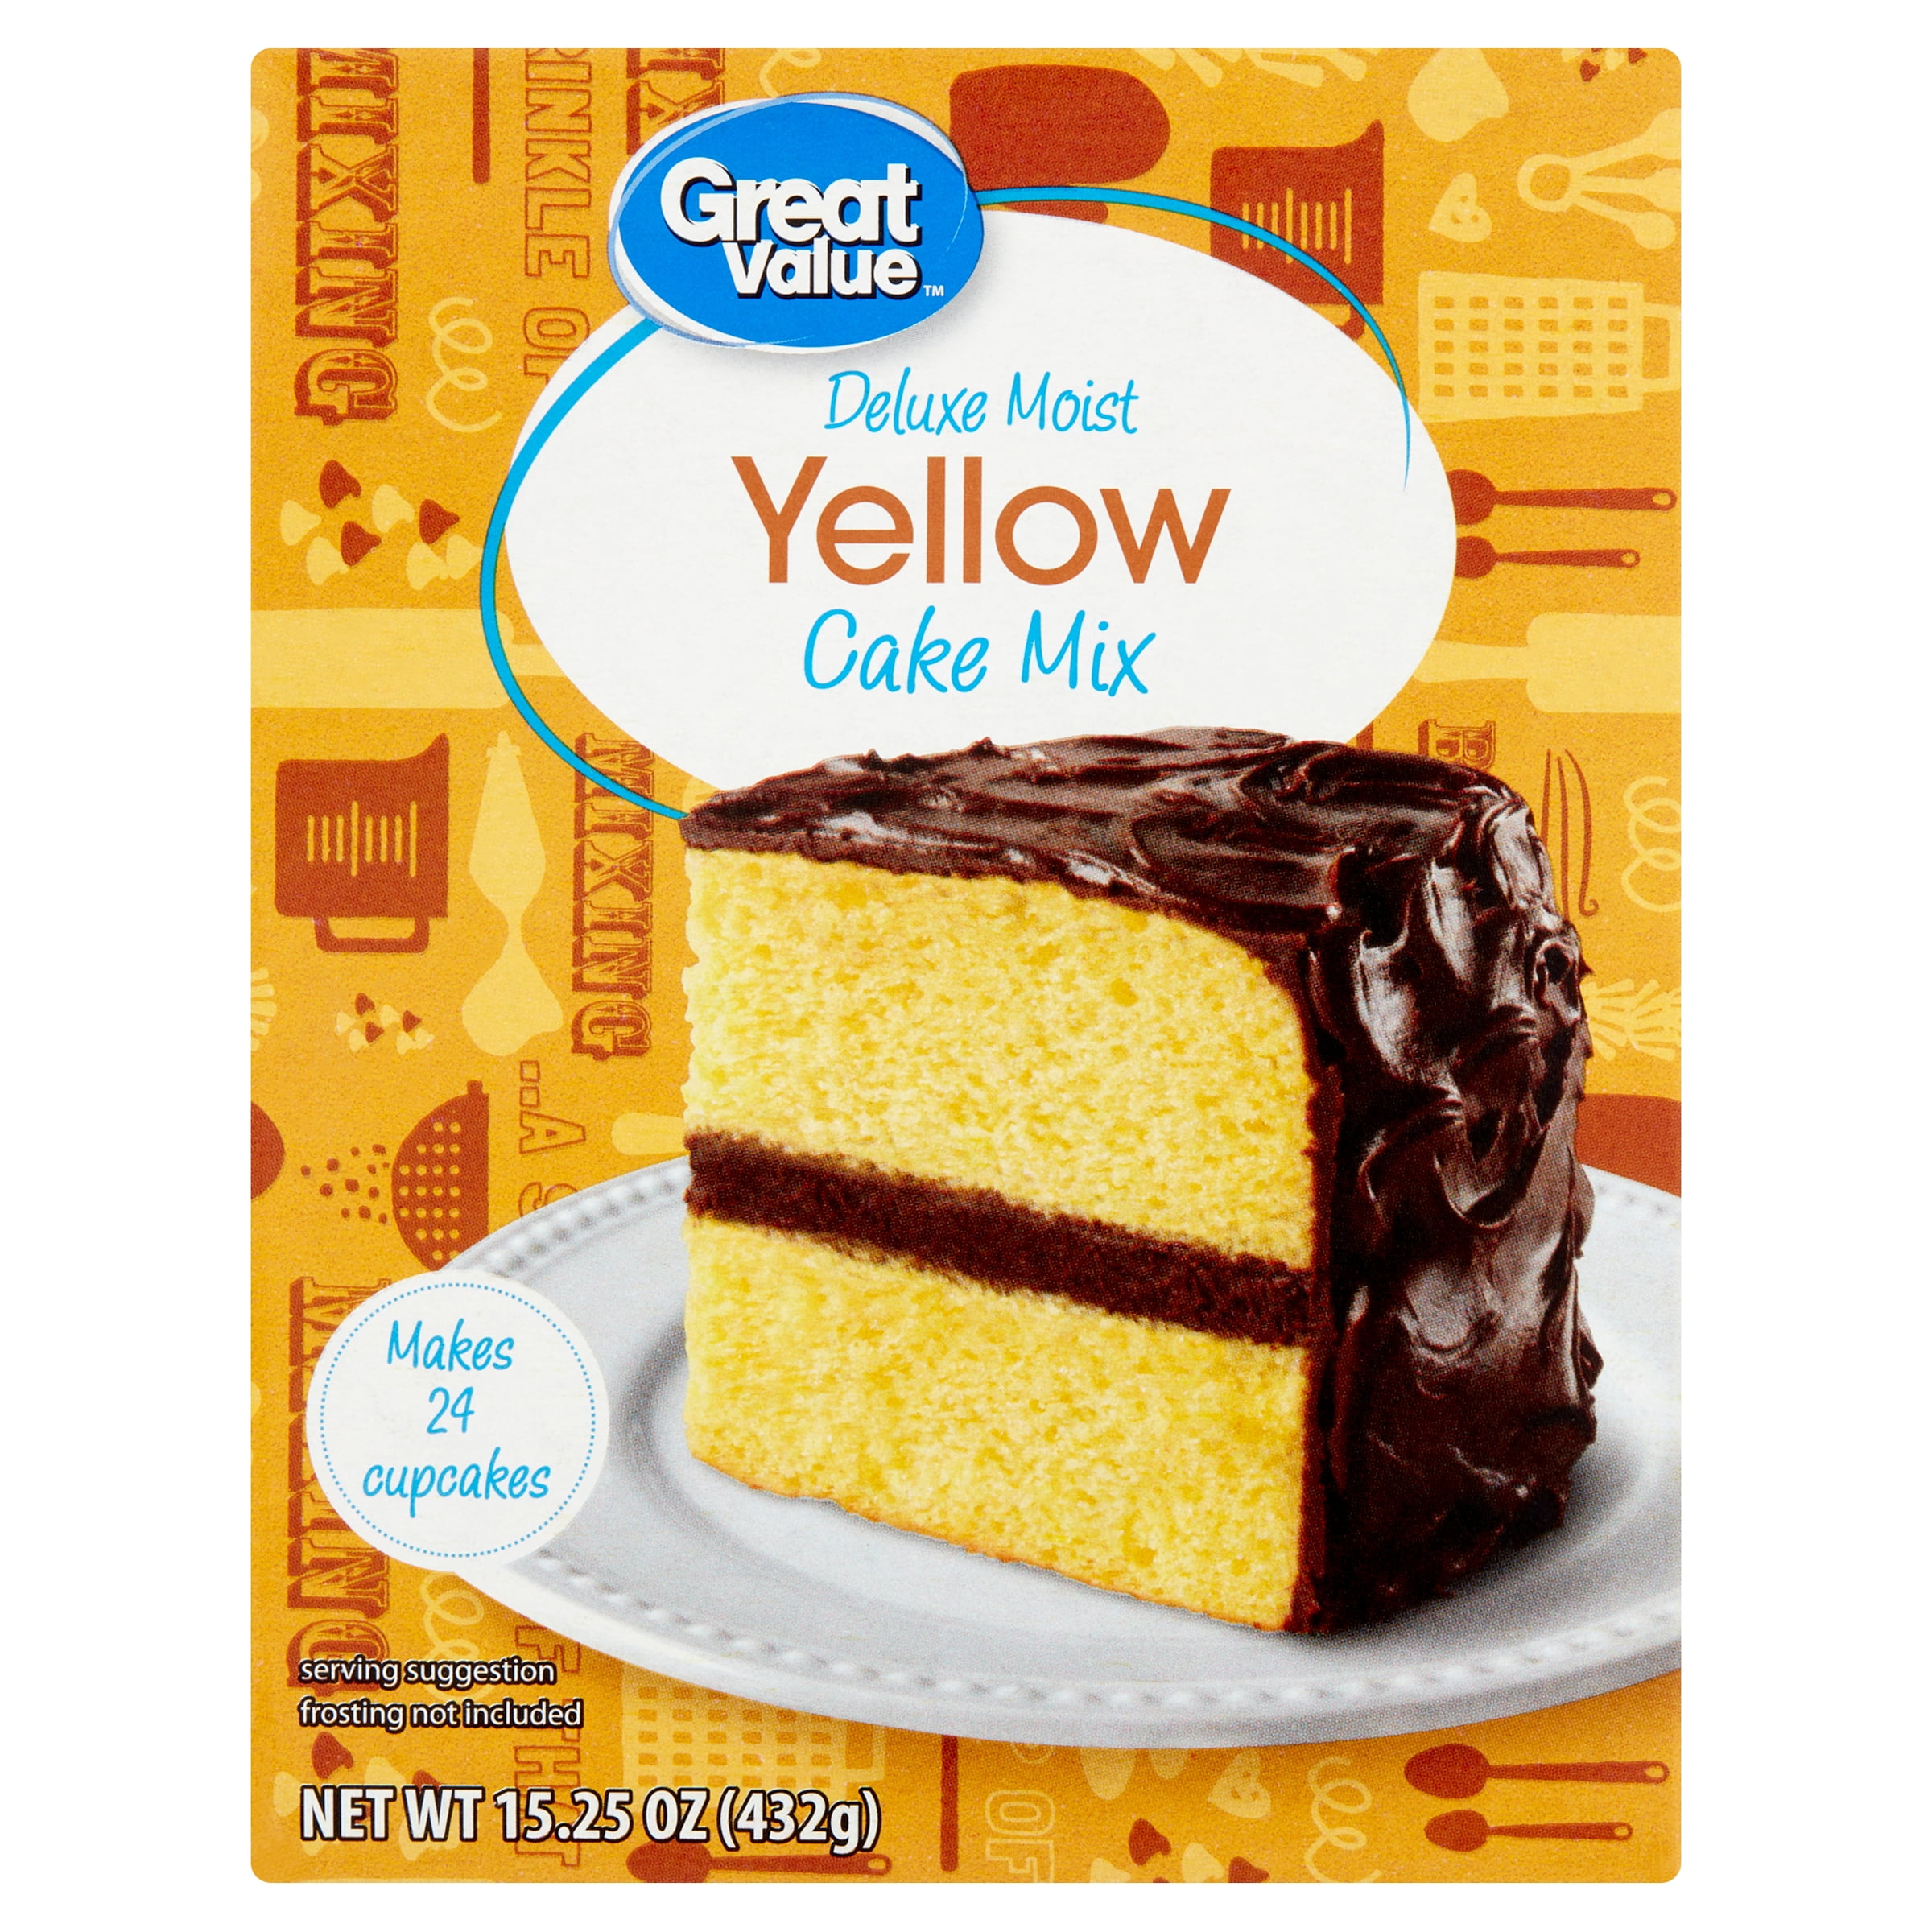 Great Value Deluxe Moist Yellow Cake Mix 15.25 OZ Box